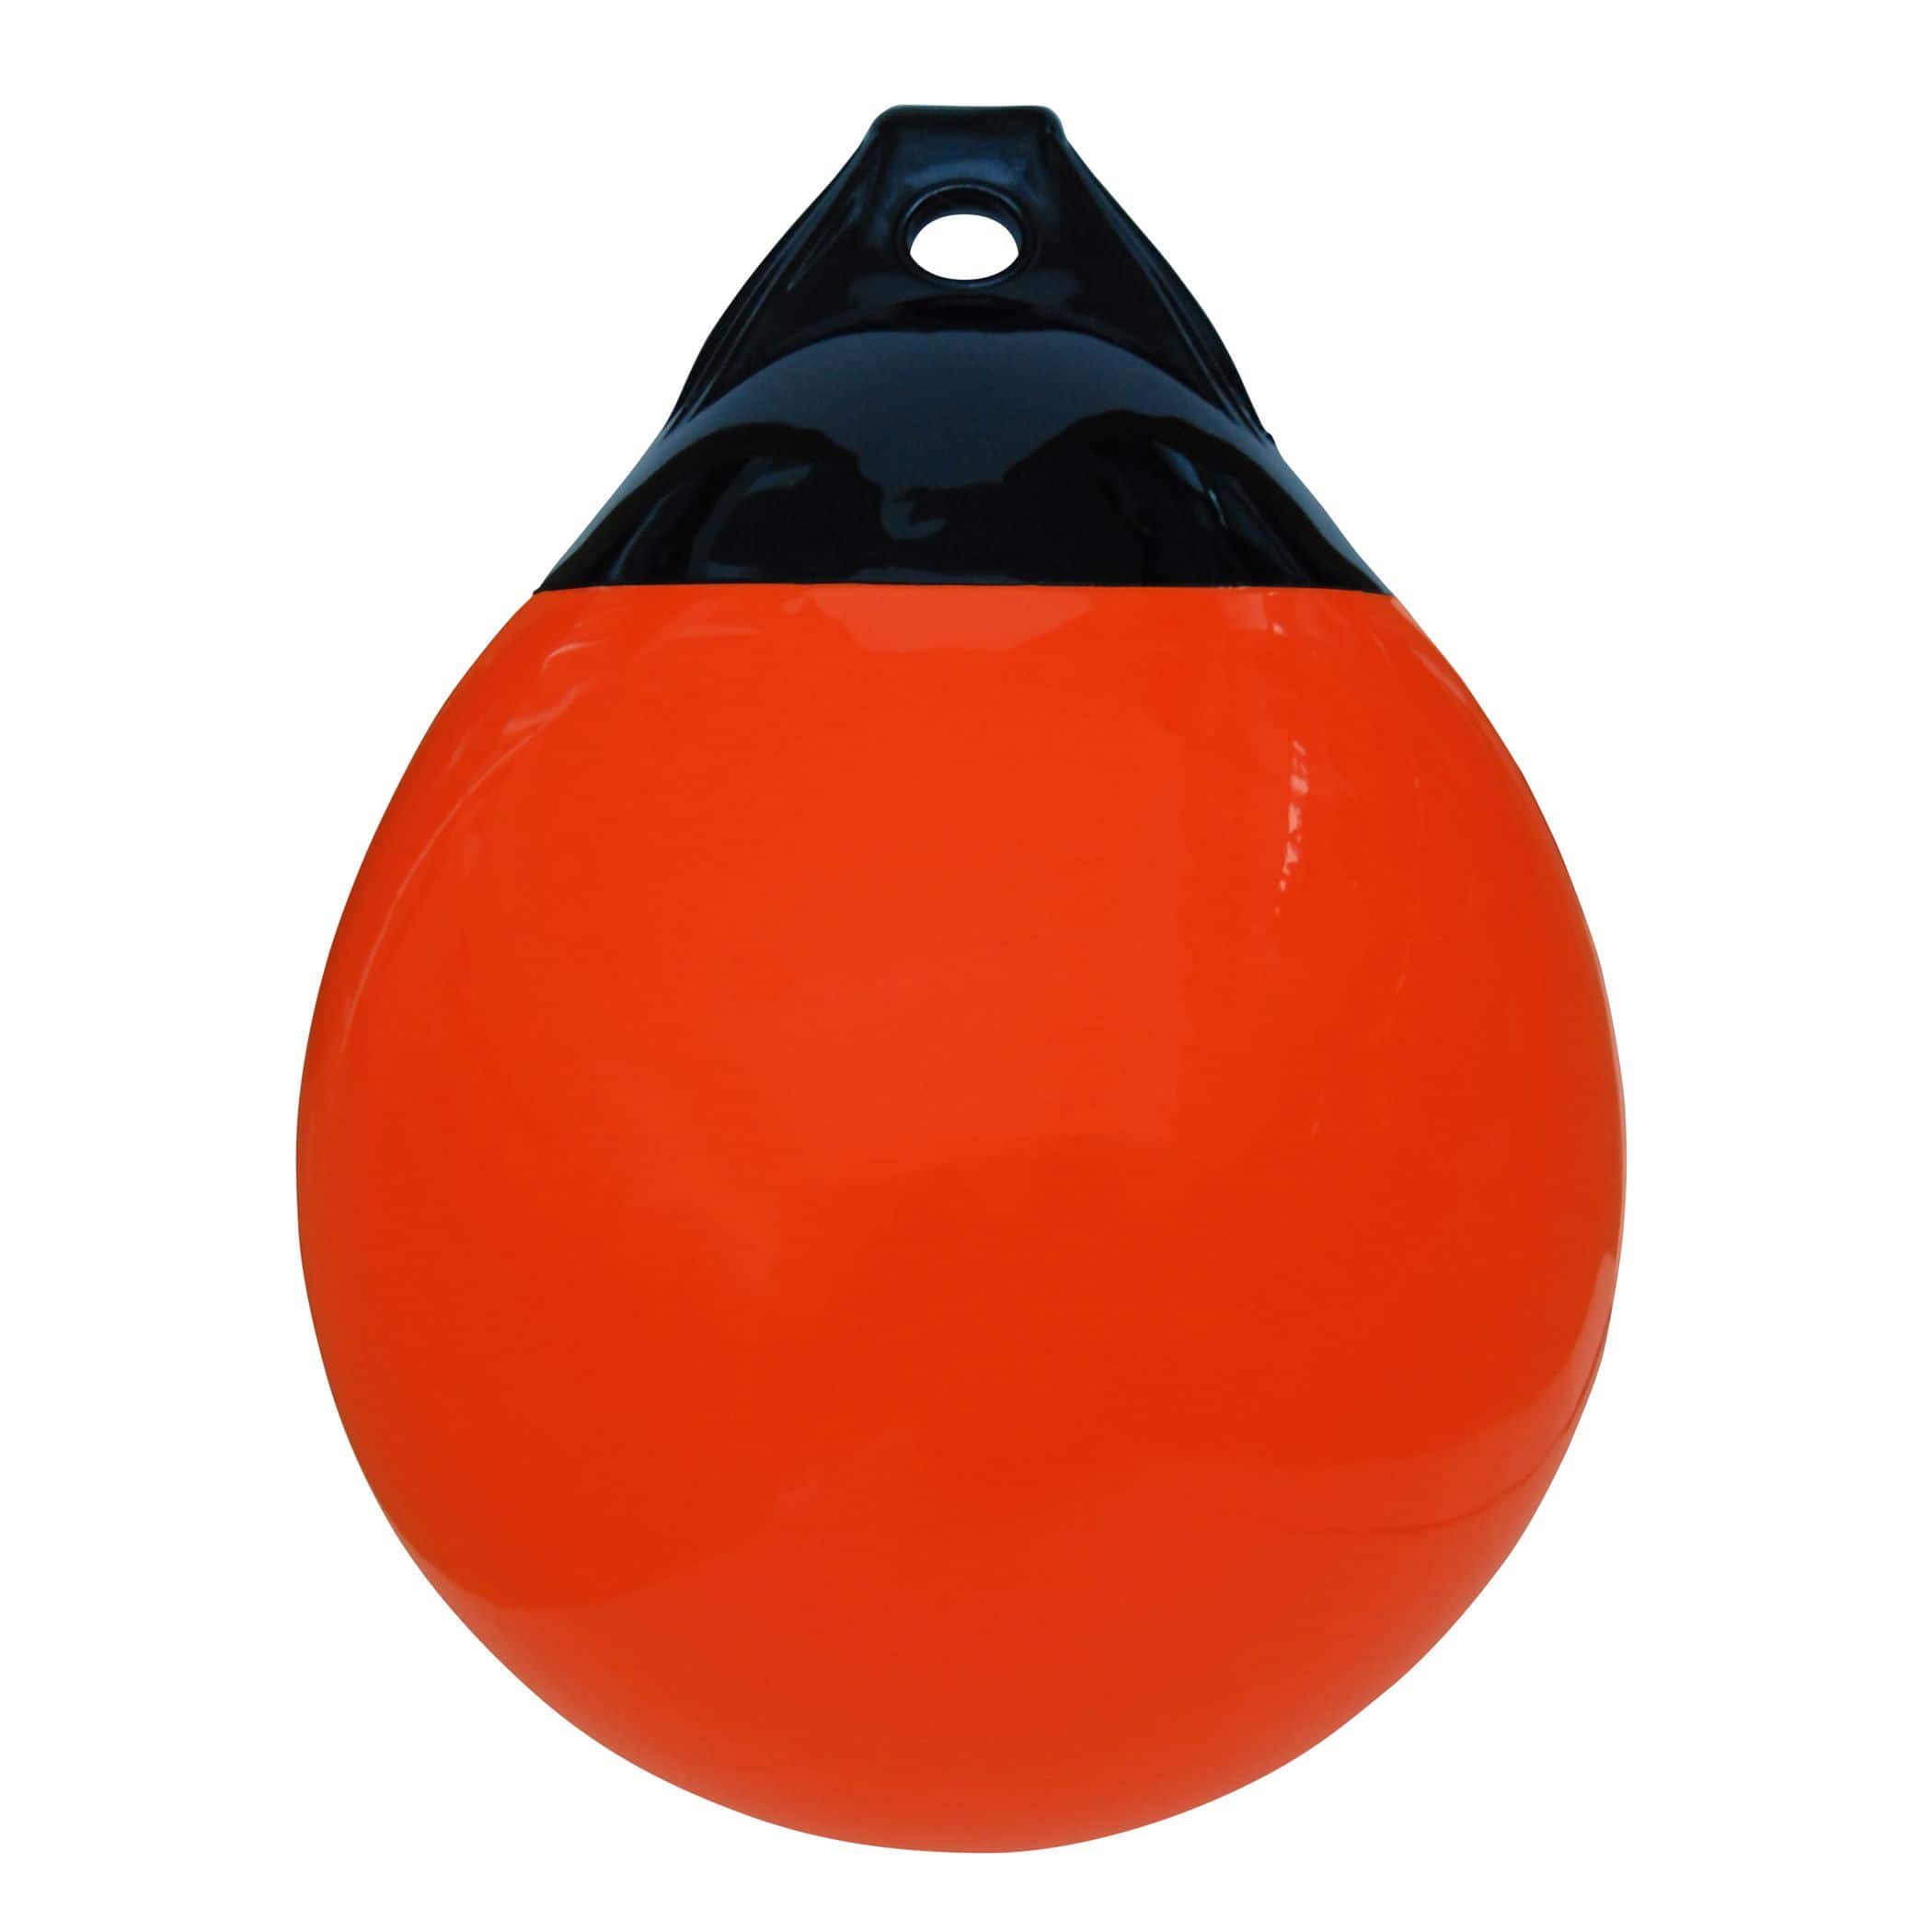 https://media-www.canadiantire.ca/product/playing/seasonal-recreation/marine-power-boating/0792454/large-vessel-tuff-end-15-inflatable-buoy-e60fb918-2075-4240-8e9d-fe462630c65d-jpgrendition.jpg